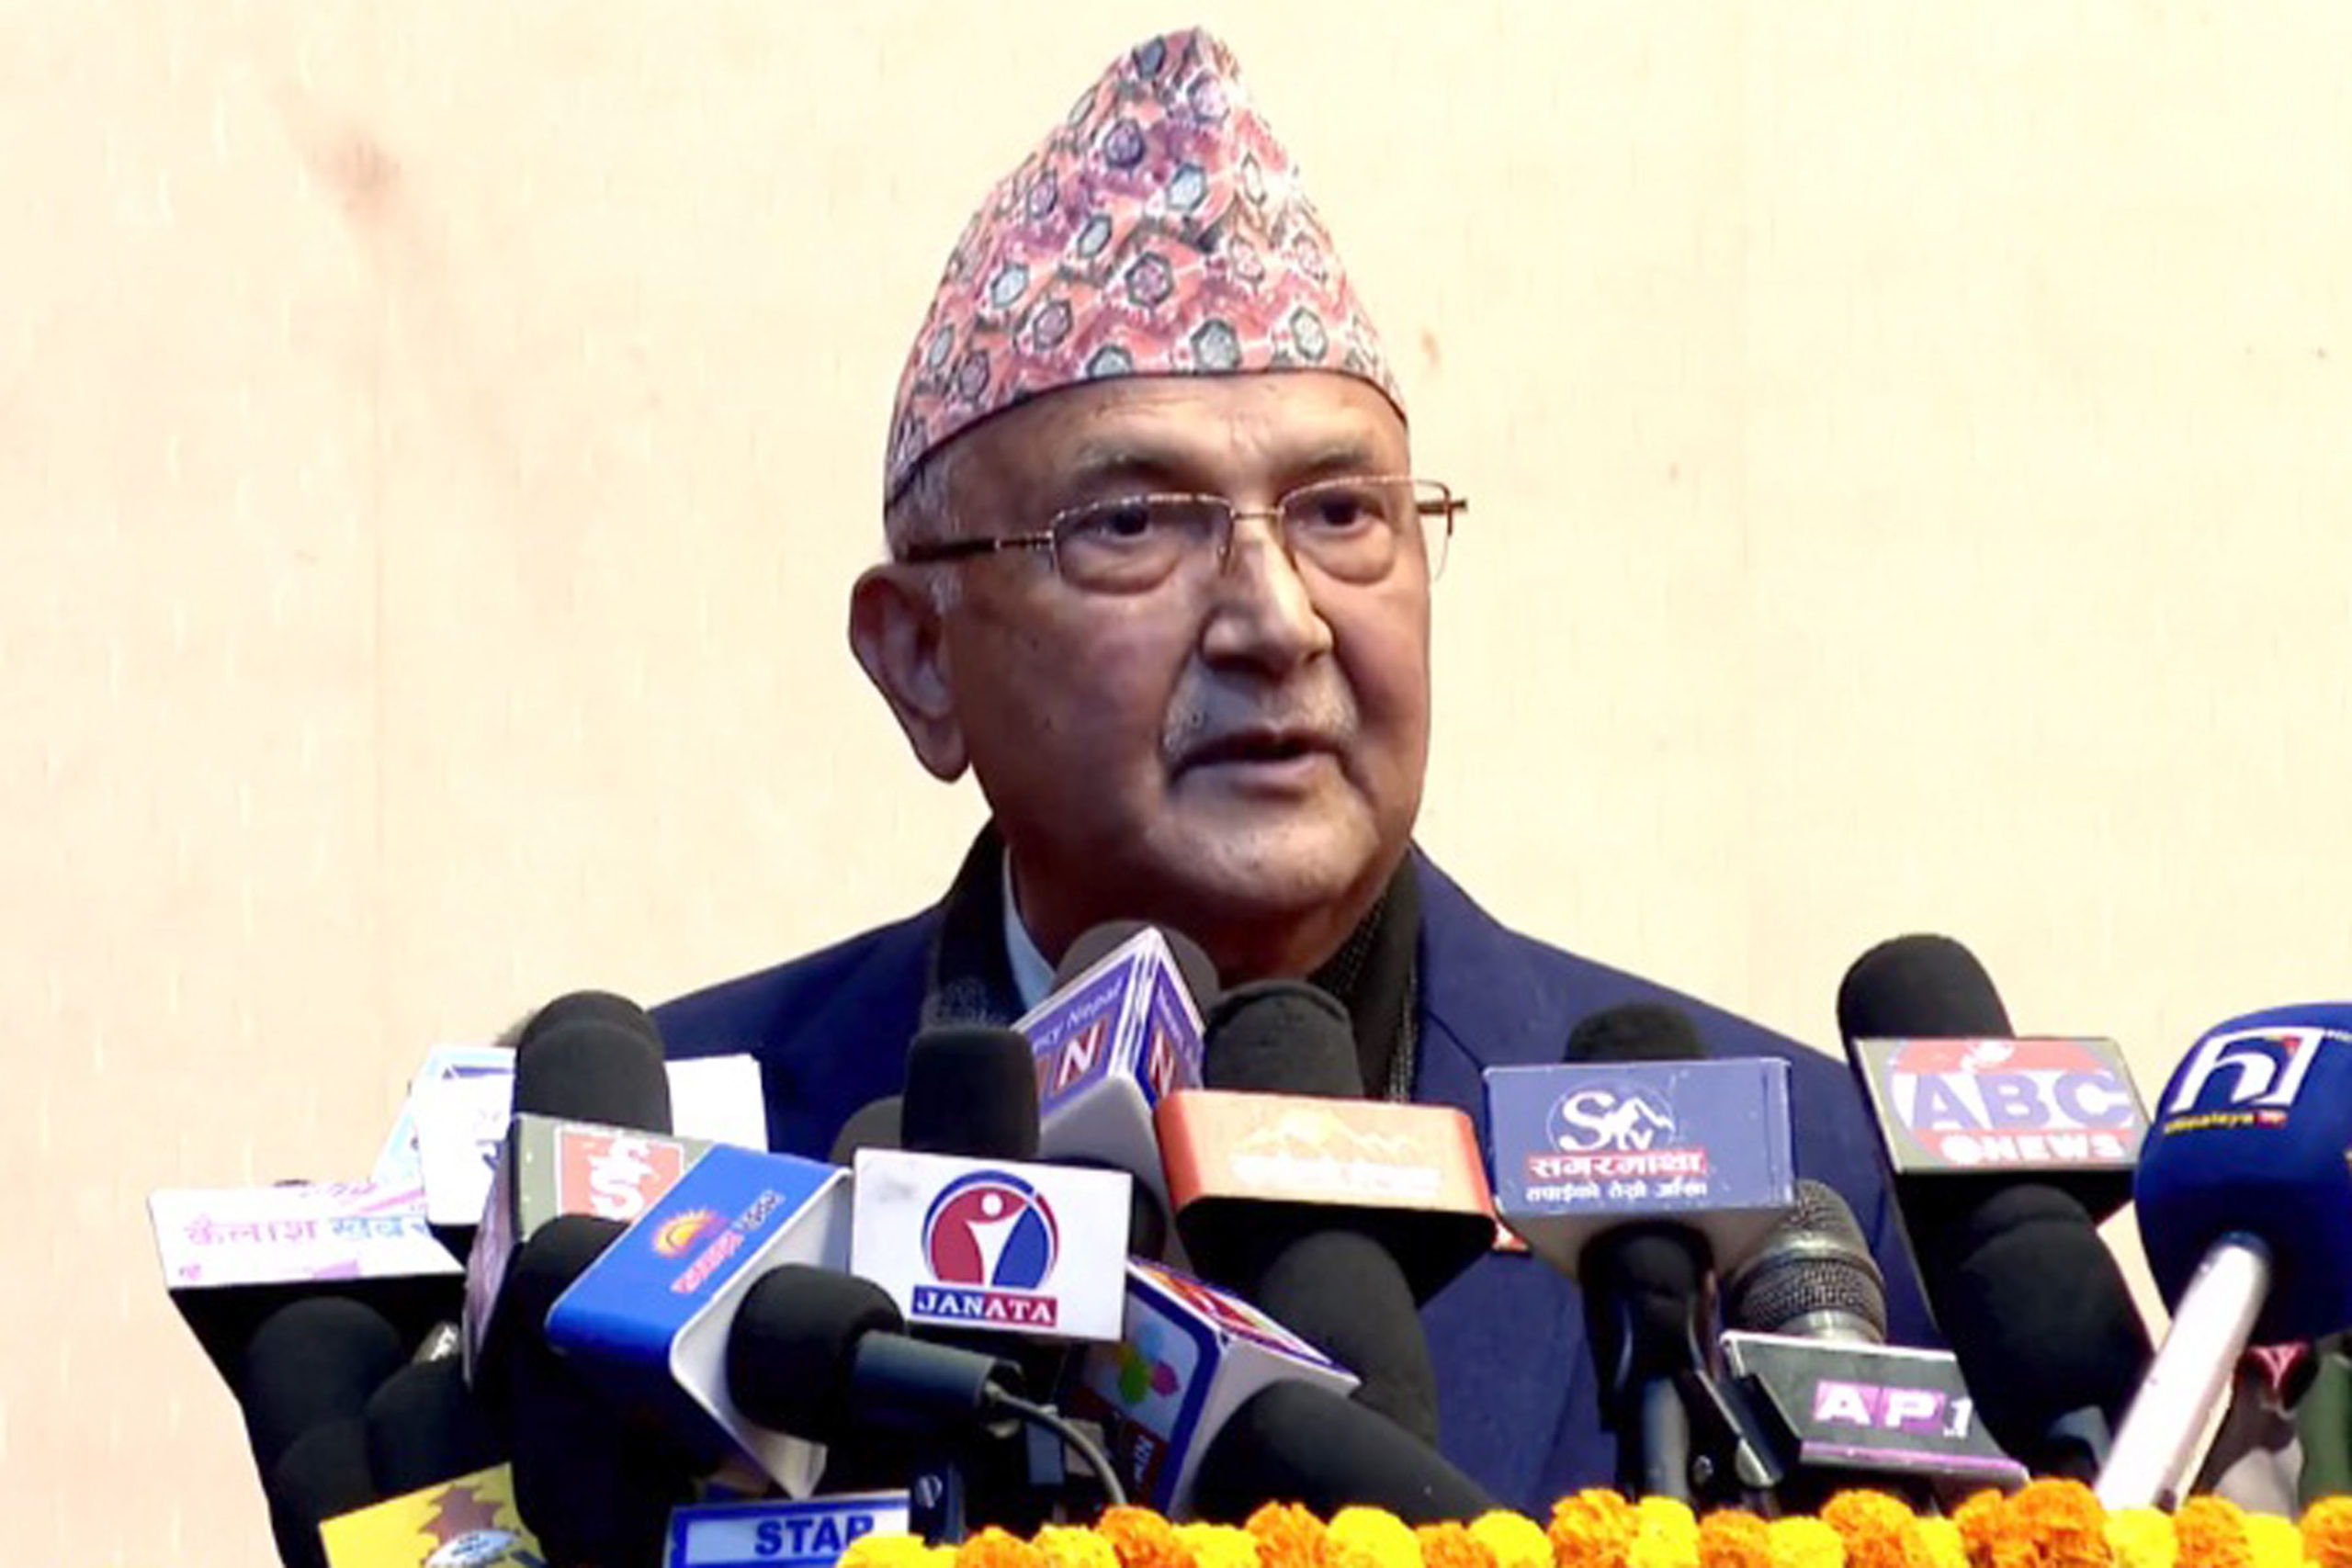 UML Chair Oli appeals to all leaders including Nepal to return to mother party